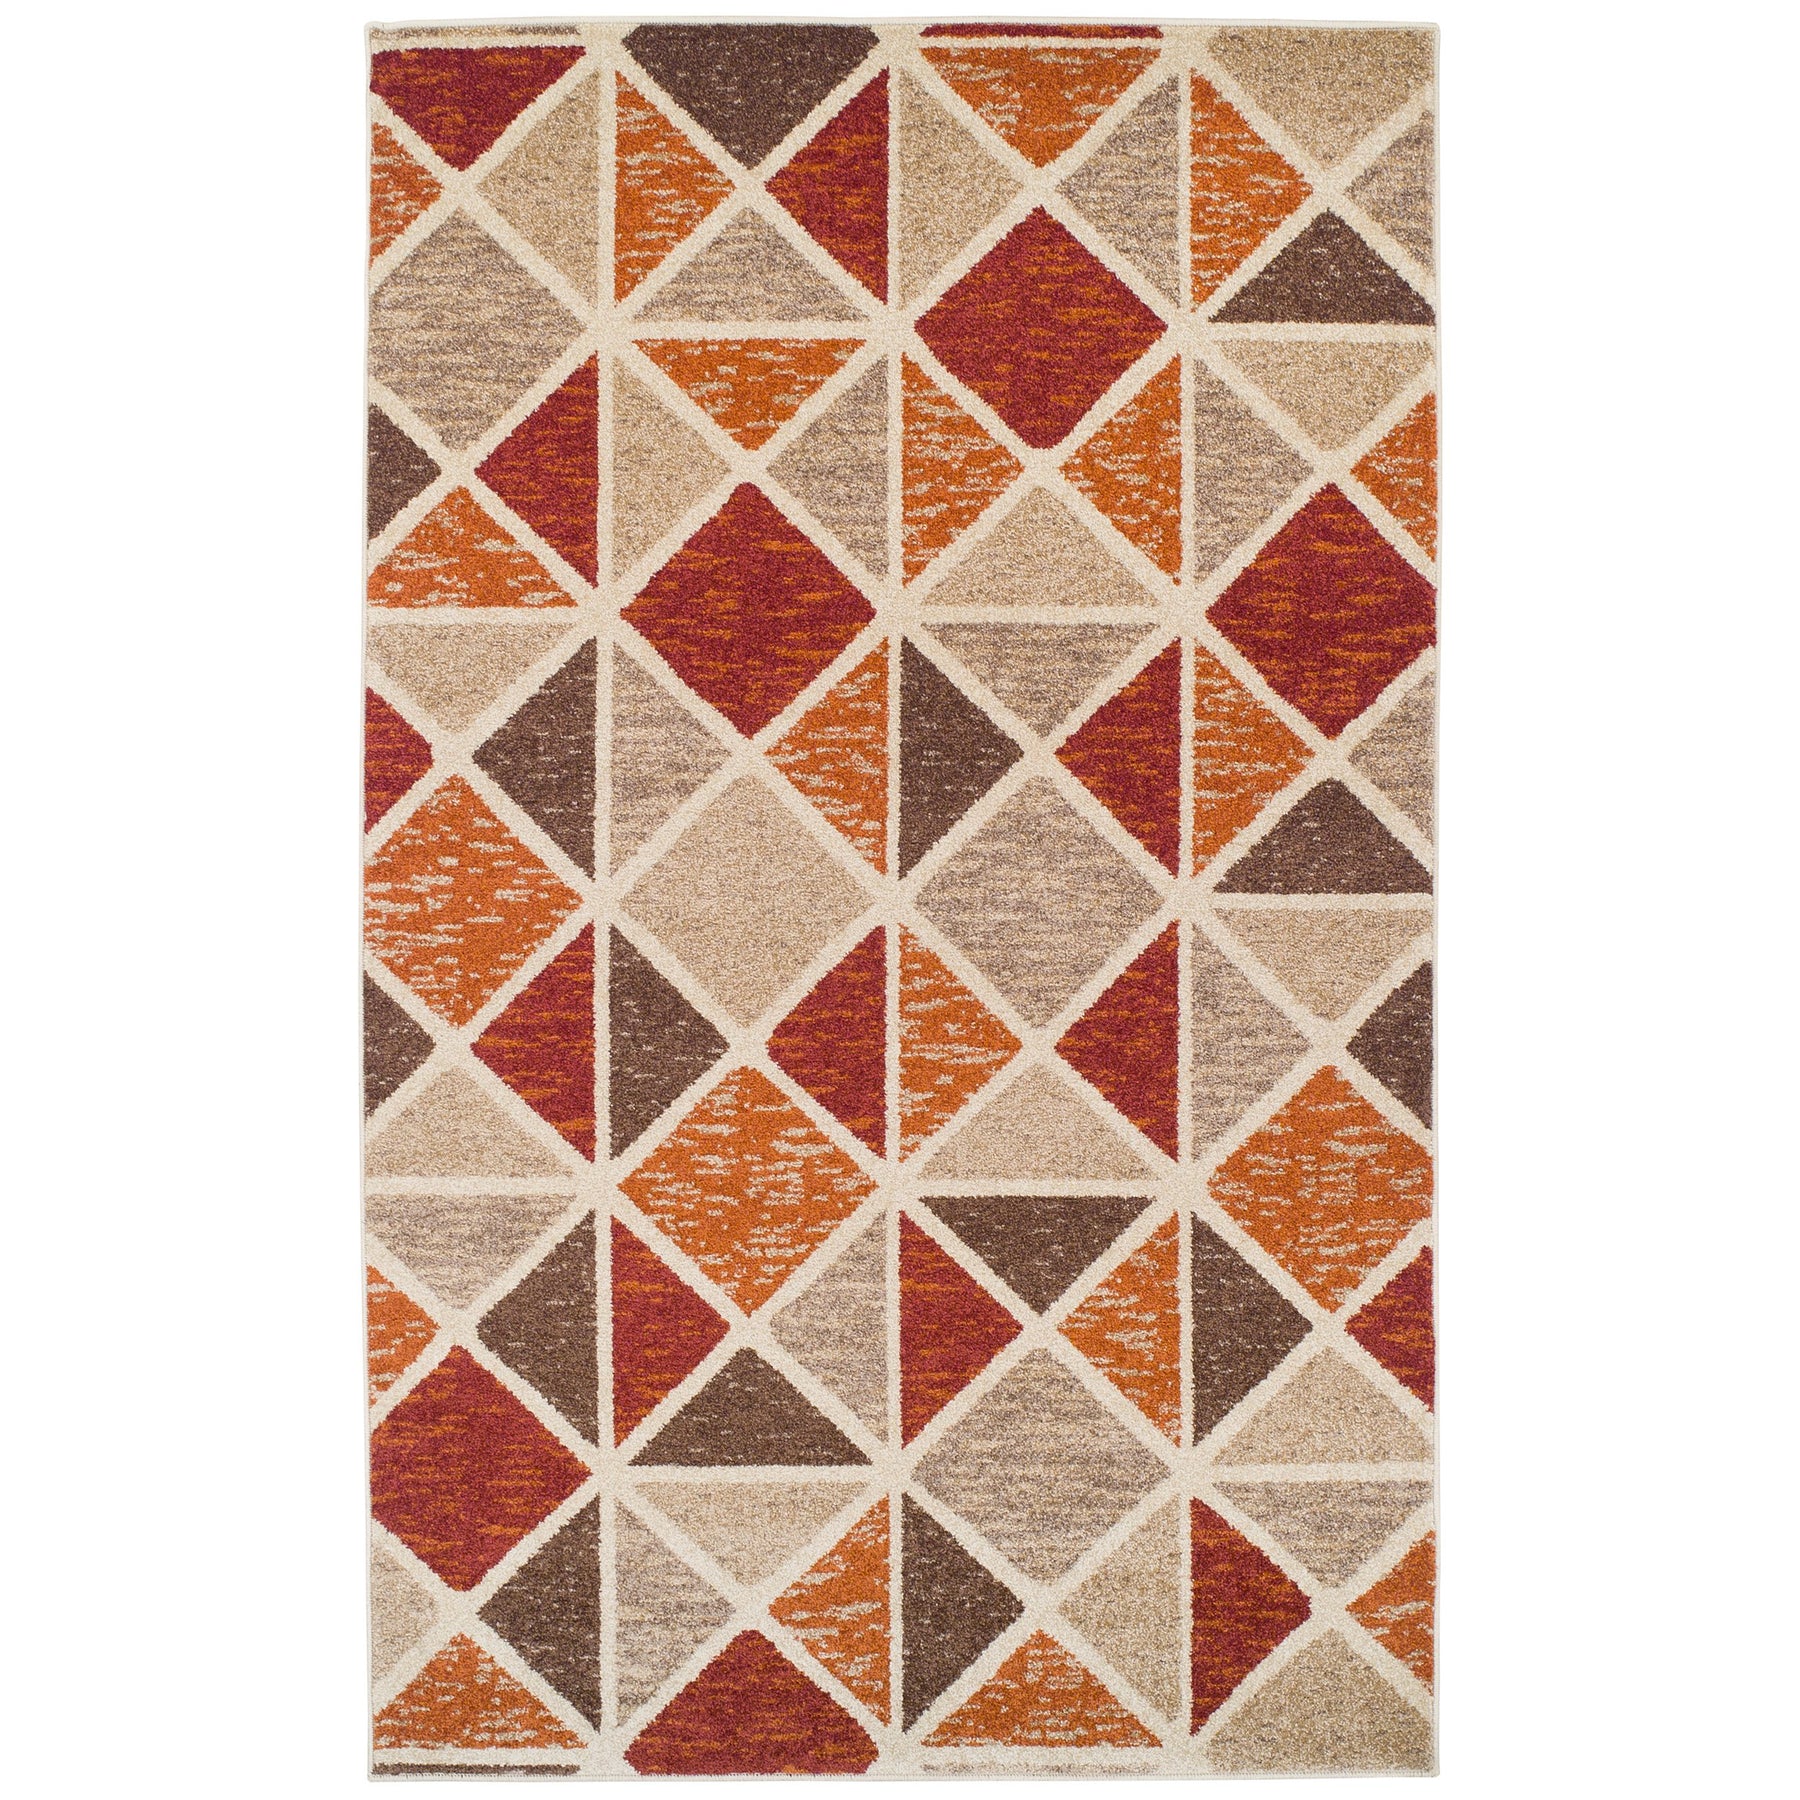 One of Our Favorite Area Rugs: The Modern Brickyard